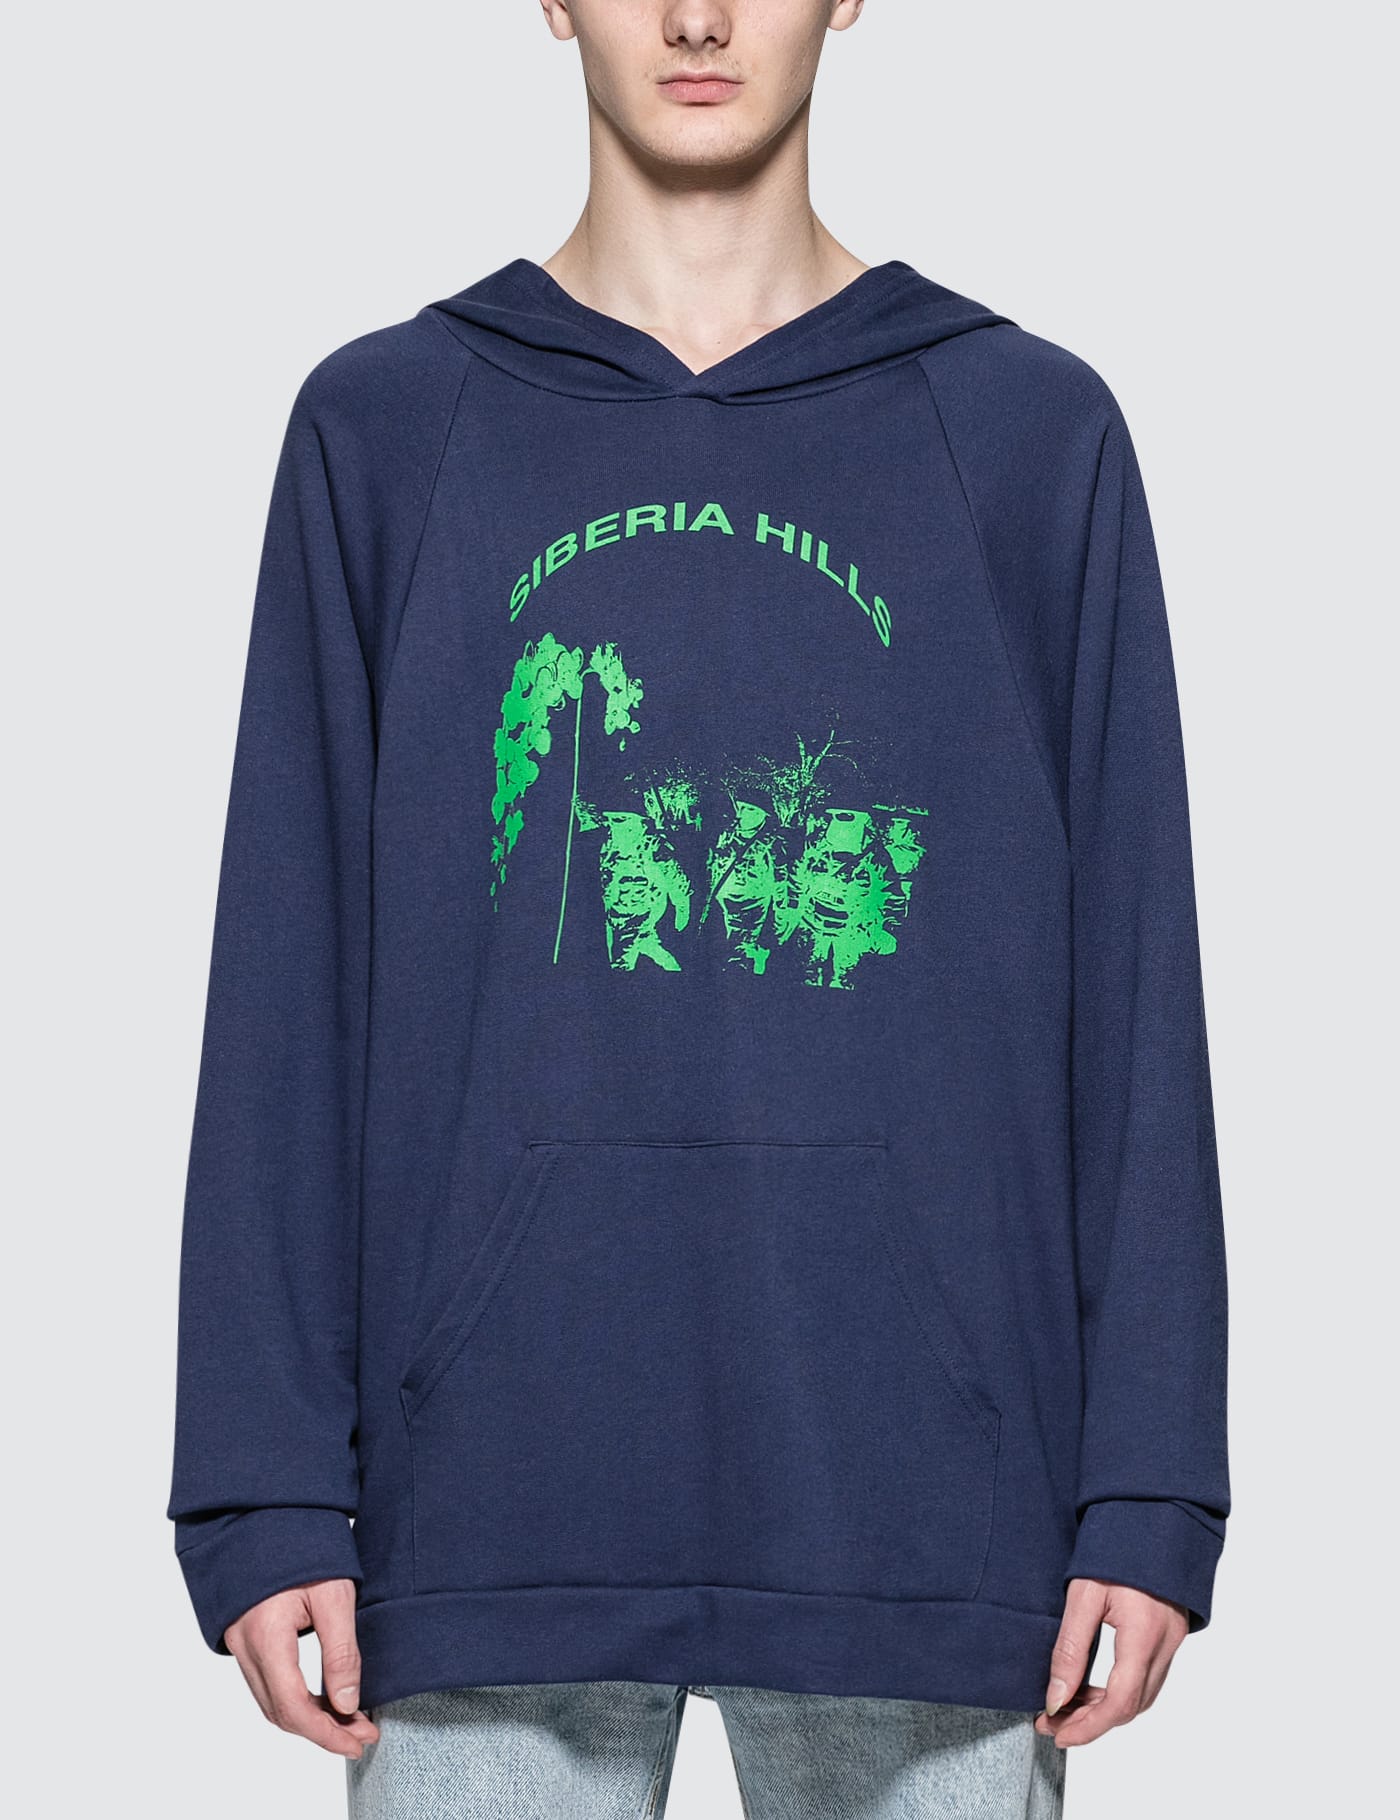 Siberia Hills - Batwing Hoodie | HBX - Globally Curated Fashion ...